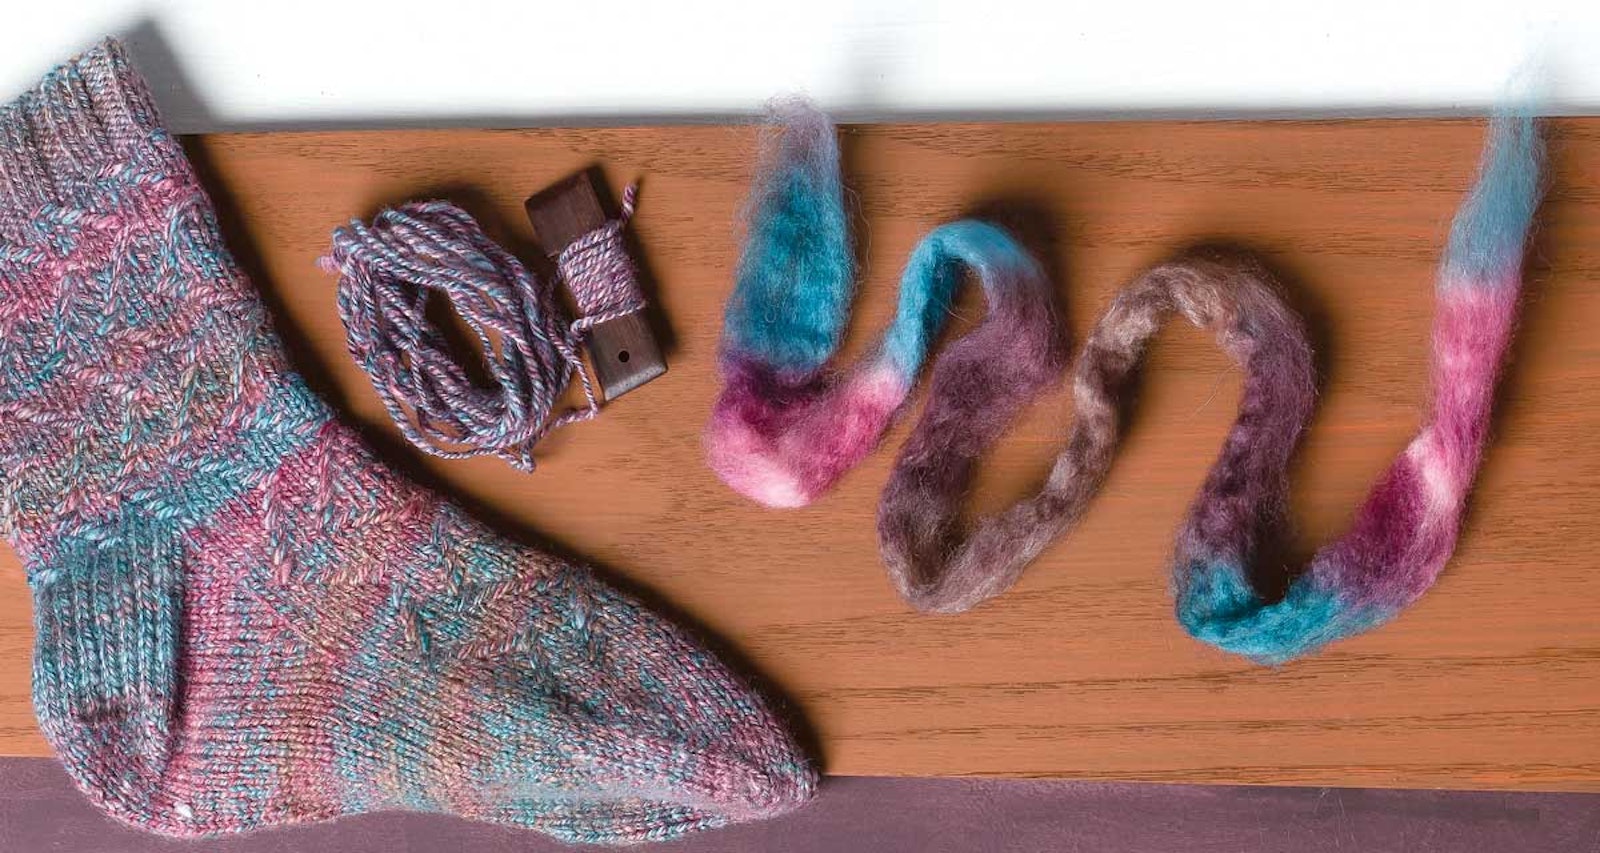 One Sock Knitting Pattern by Kate Atherley